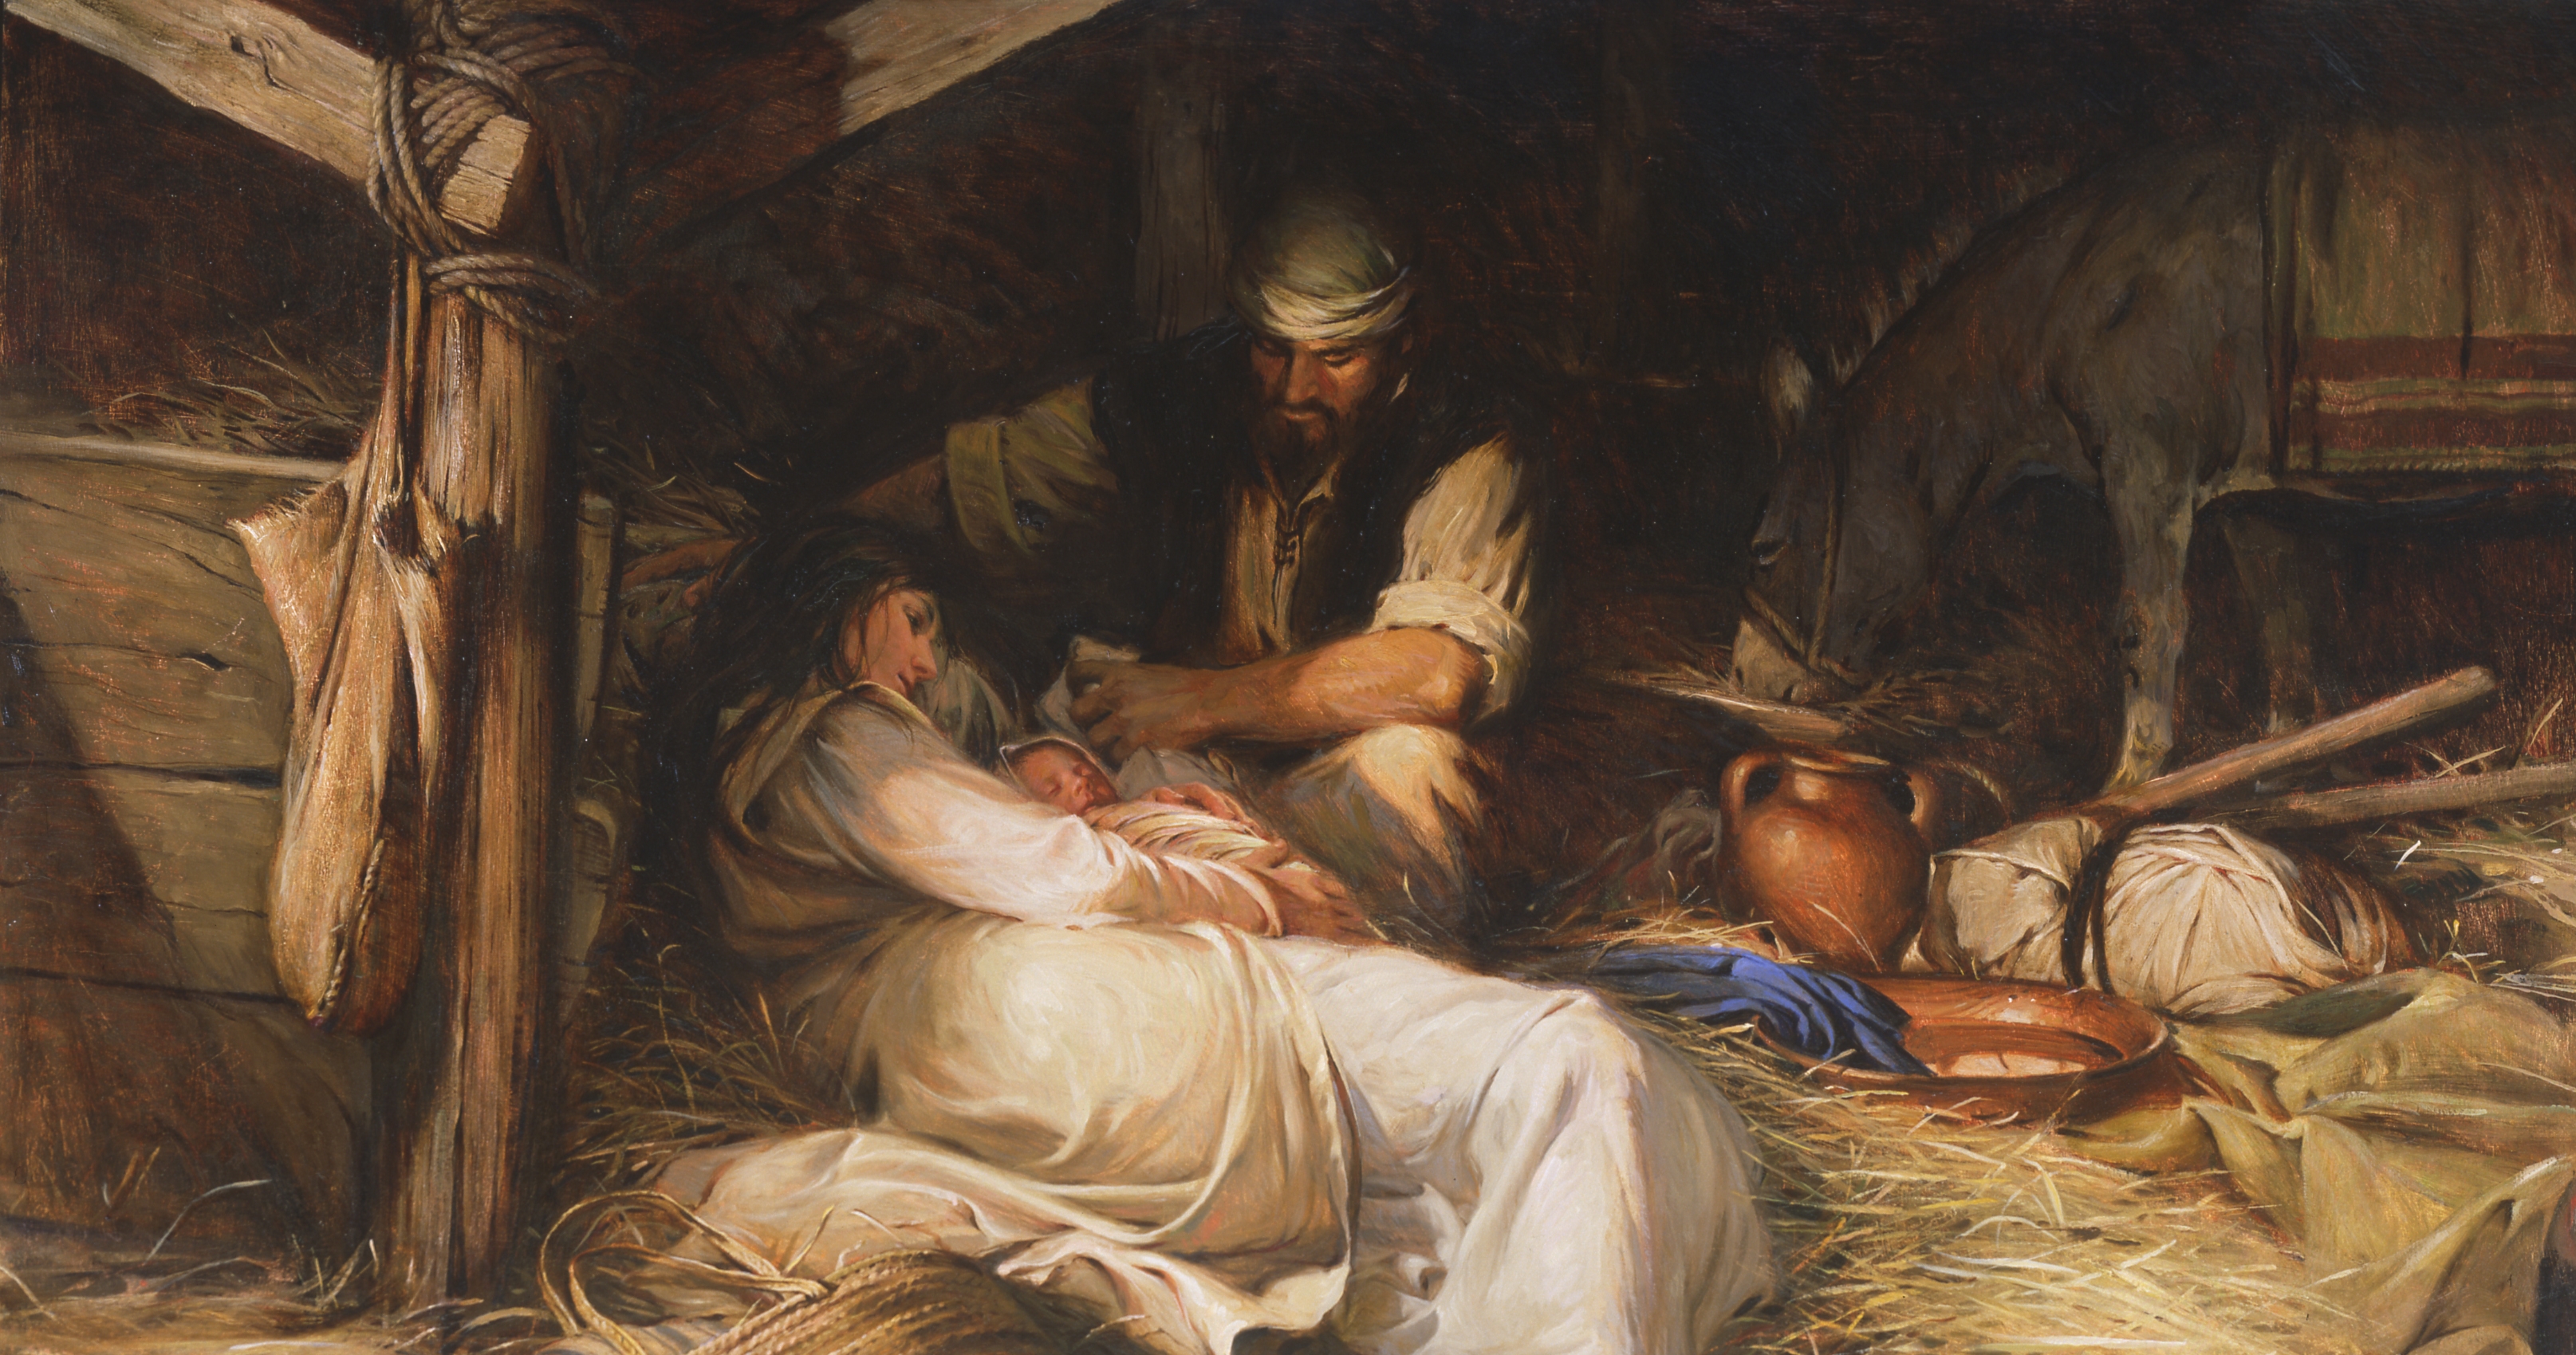 The painting portrays, in the setting of a stable the reclining Mary holding the Christ Chiild shortly after his birth.  Joseph looks on holding cloth in his hand.  There is tender interaction.  To the right a donkey eats straw and several vessels are visible.  To the left is a woven purse-basket and a hay loft.  Light and shade bathe the scene.  Signed Walter Rane on the lower right.  The paitnign was created using live models, objects and the real environment of a barn.  The title of the paintig derives from scriptures found in 1 Nephi 11:14-21 of the Book of Mormon, where Nephi visualizes the Virgin Mary with her son, the Savior.